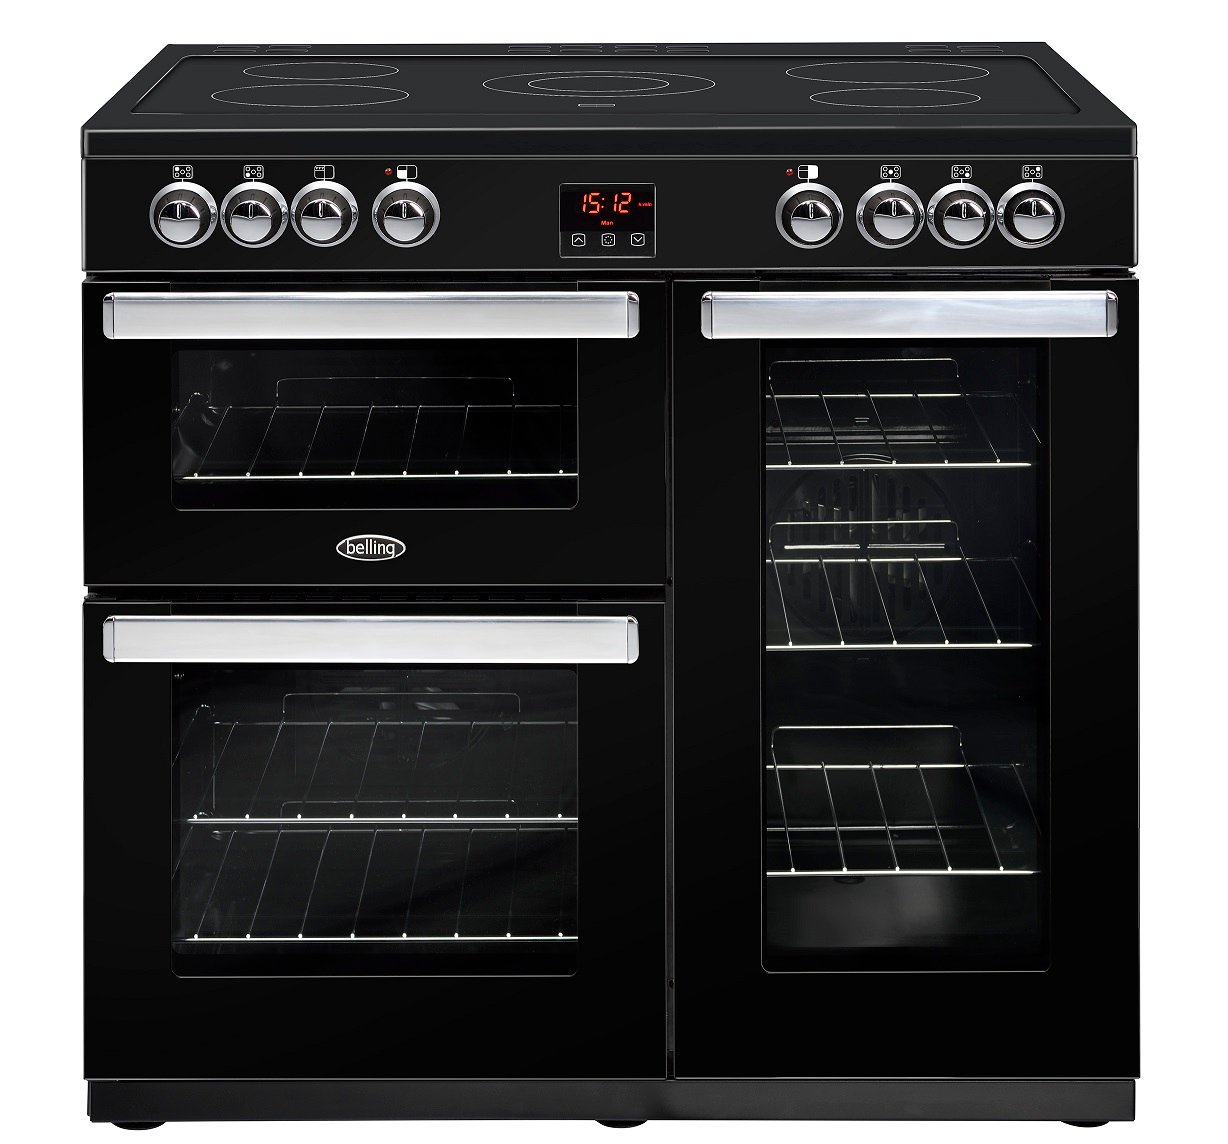 90cm electric range cooker with 5 zone ceramic hotplate, Maxi-Clock, market leading tall oven and easy clean enamel.